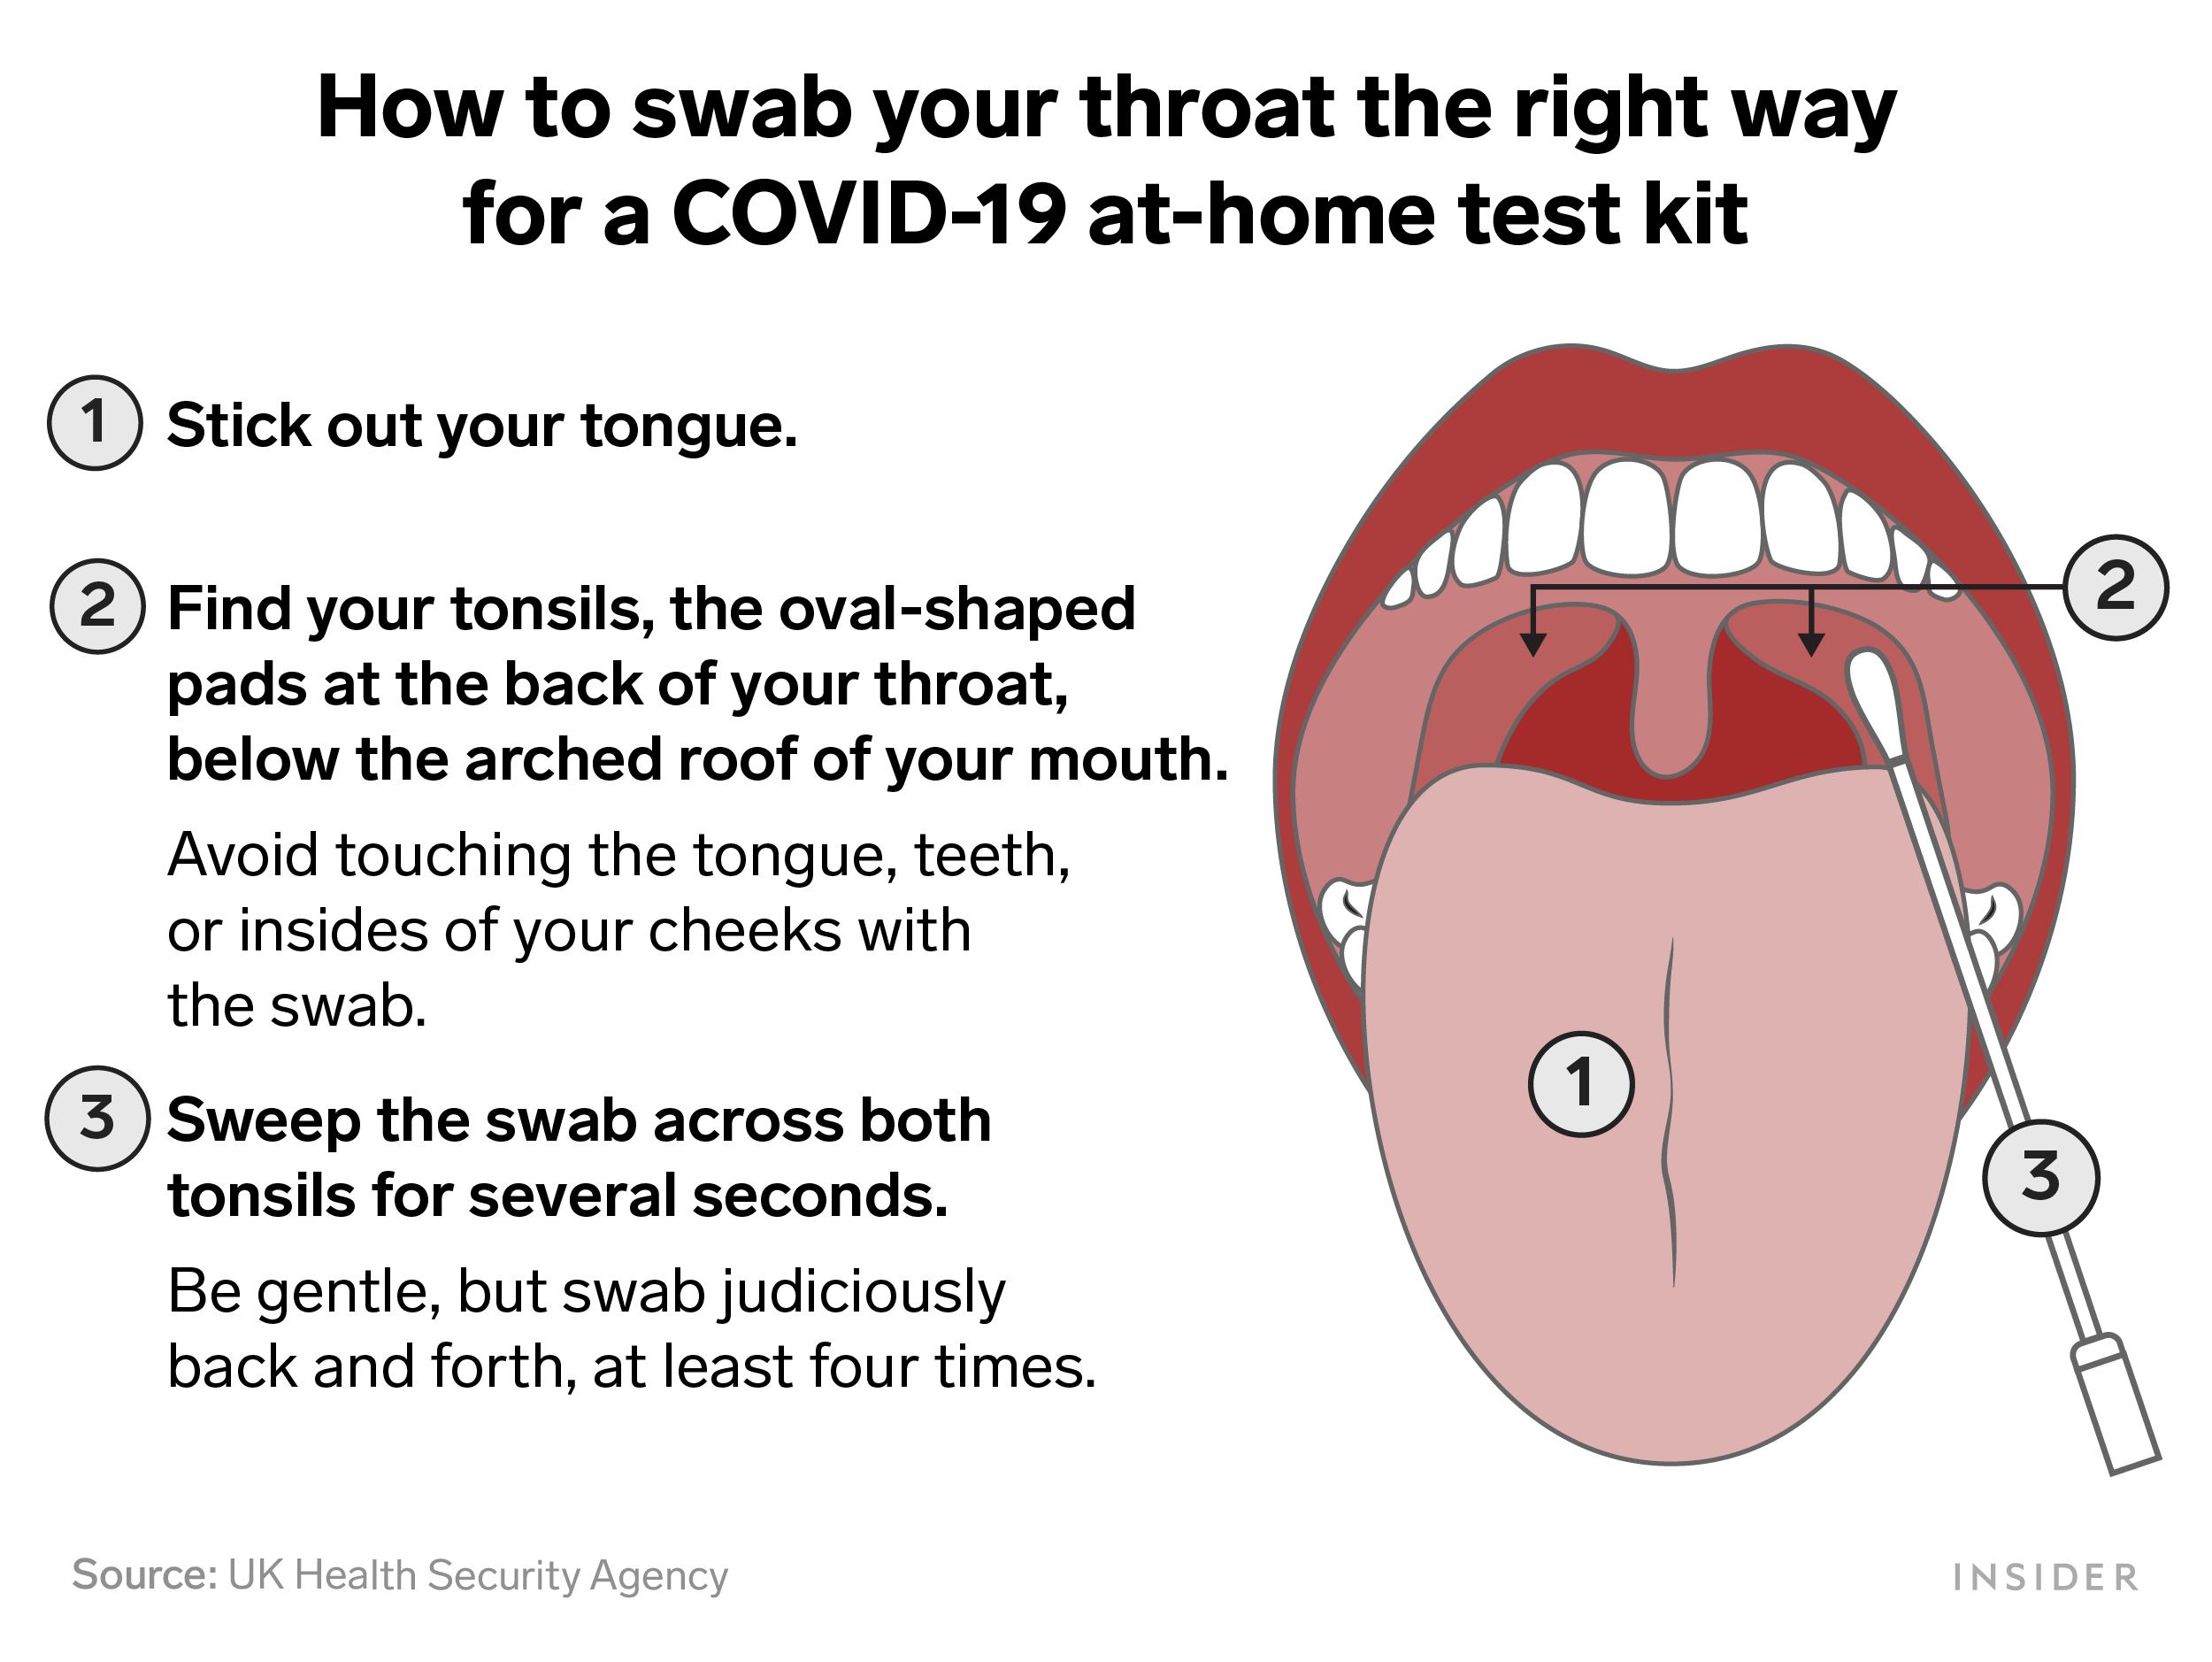 Illustration explainer of how to swab your throat the right way for a COVID-19 at-home test kit.